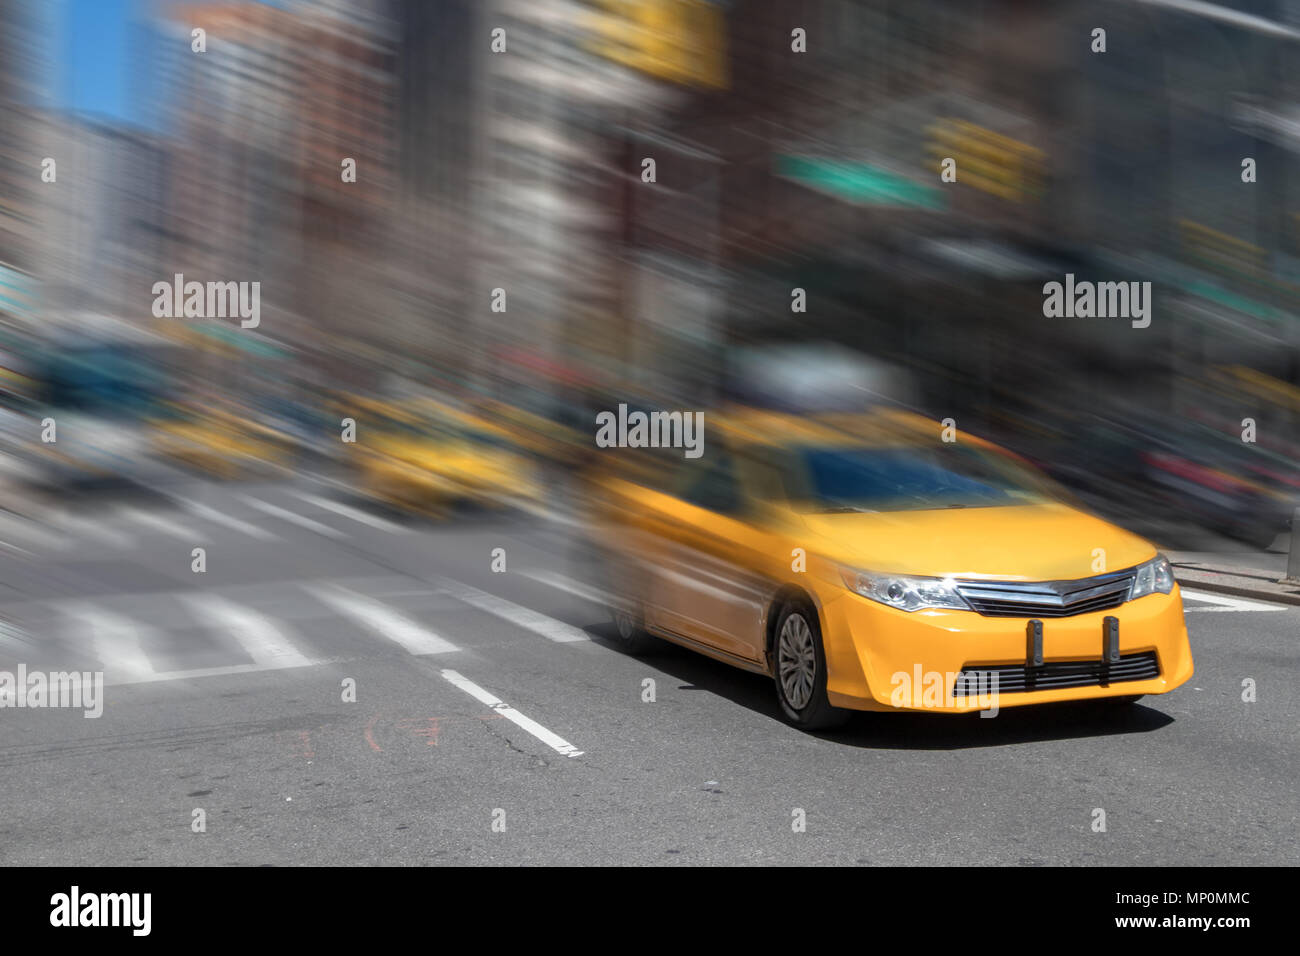 Face moving taxi cab motion blur background in New York City NYC Stock Photo